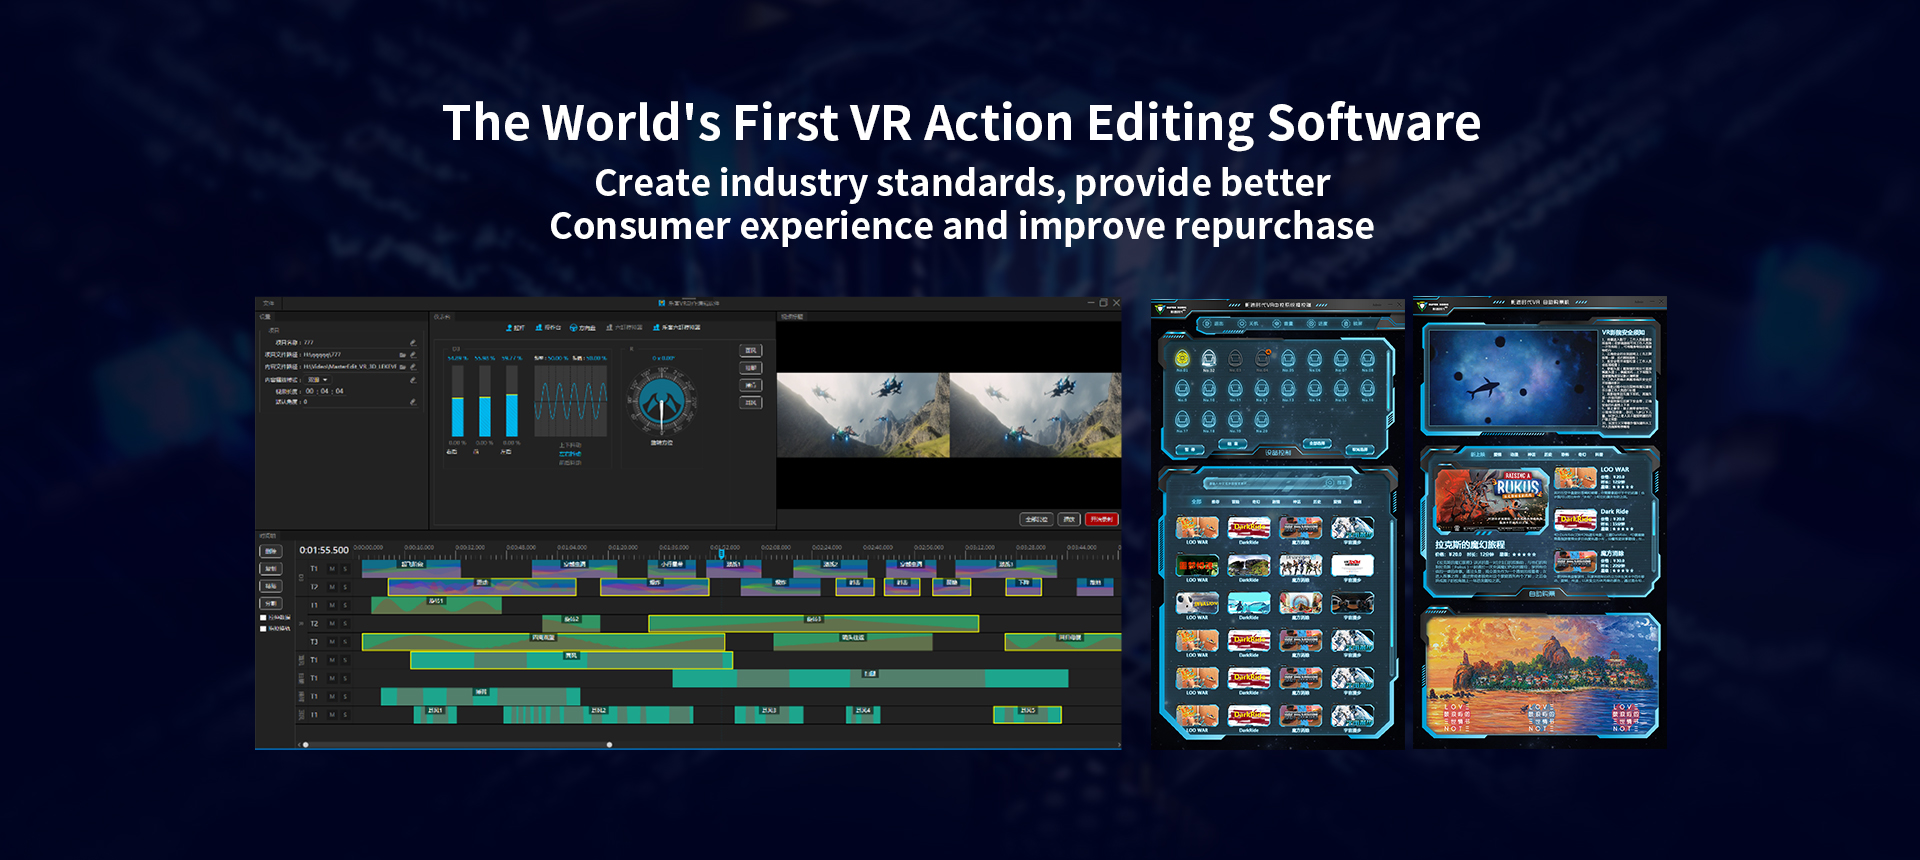 VR Theme Park VR Action Editing Software